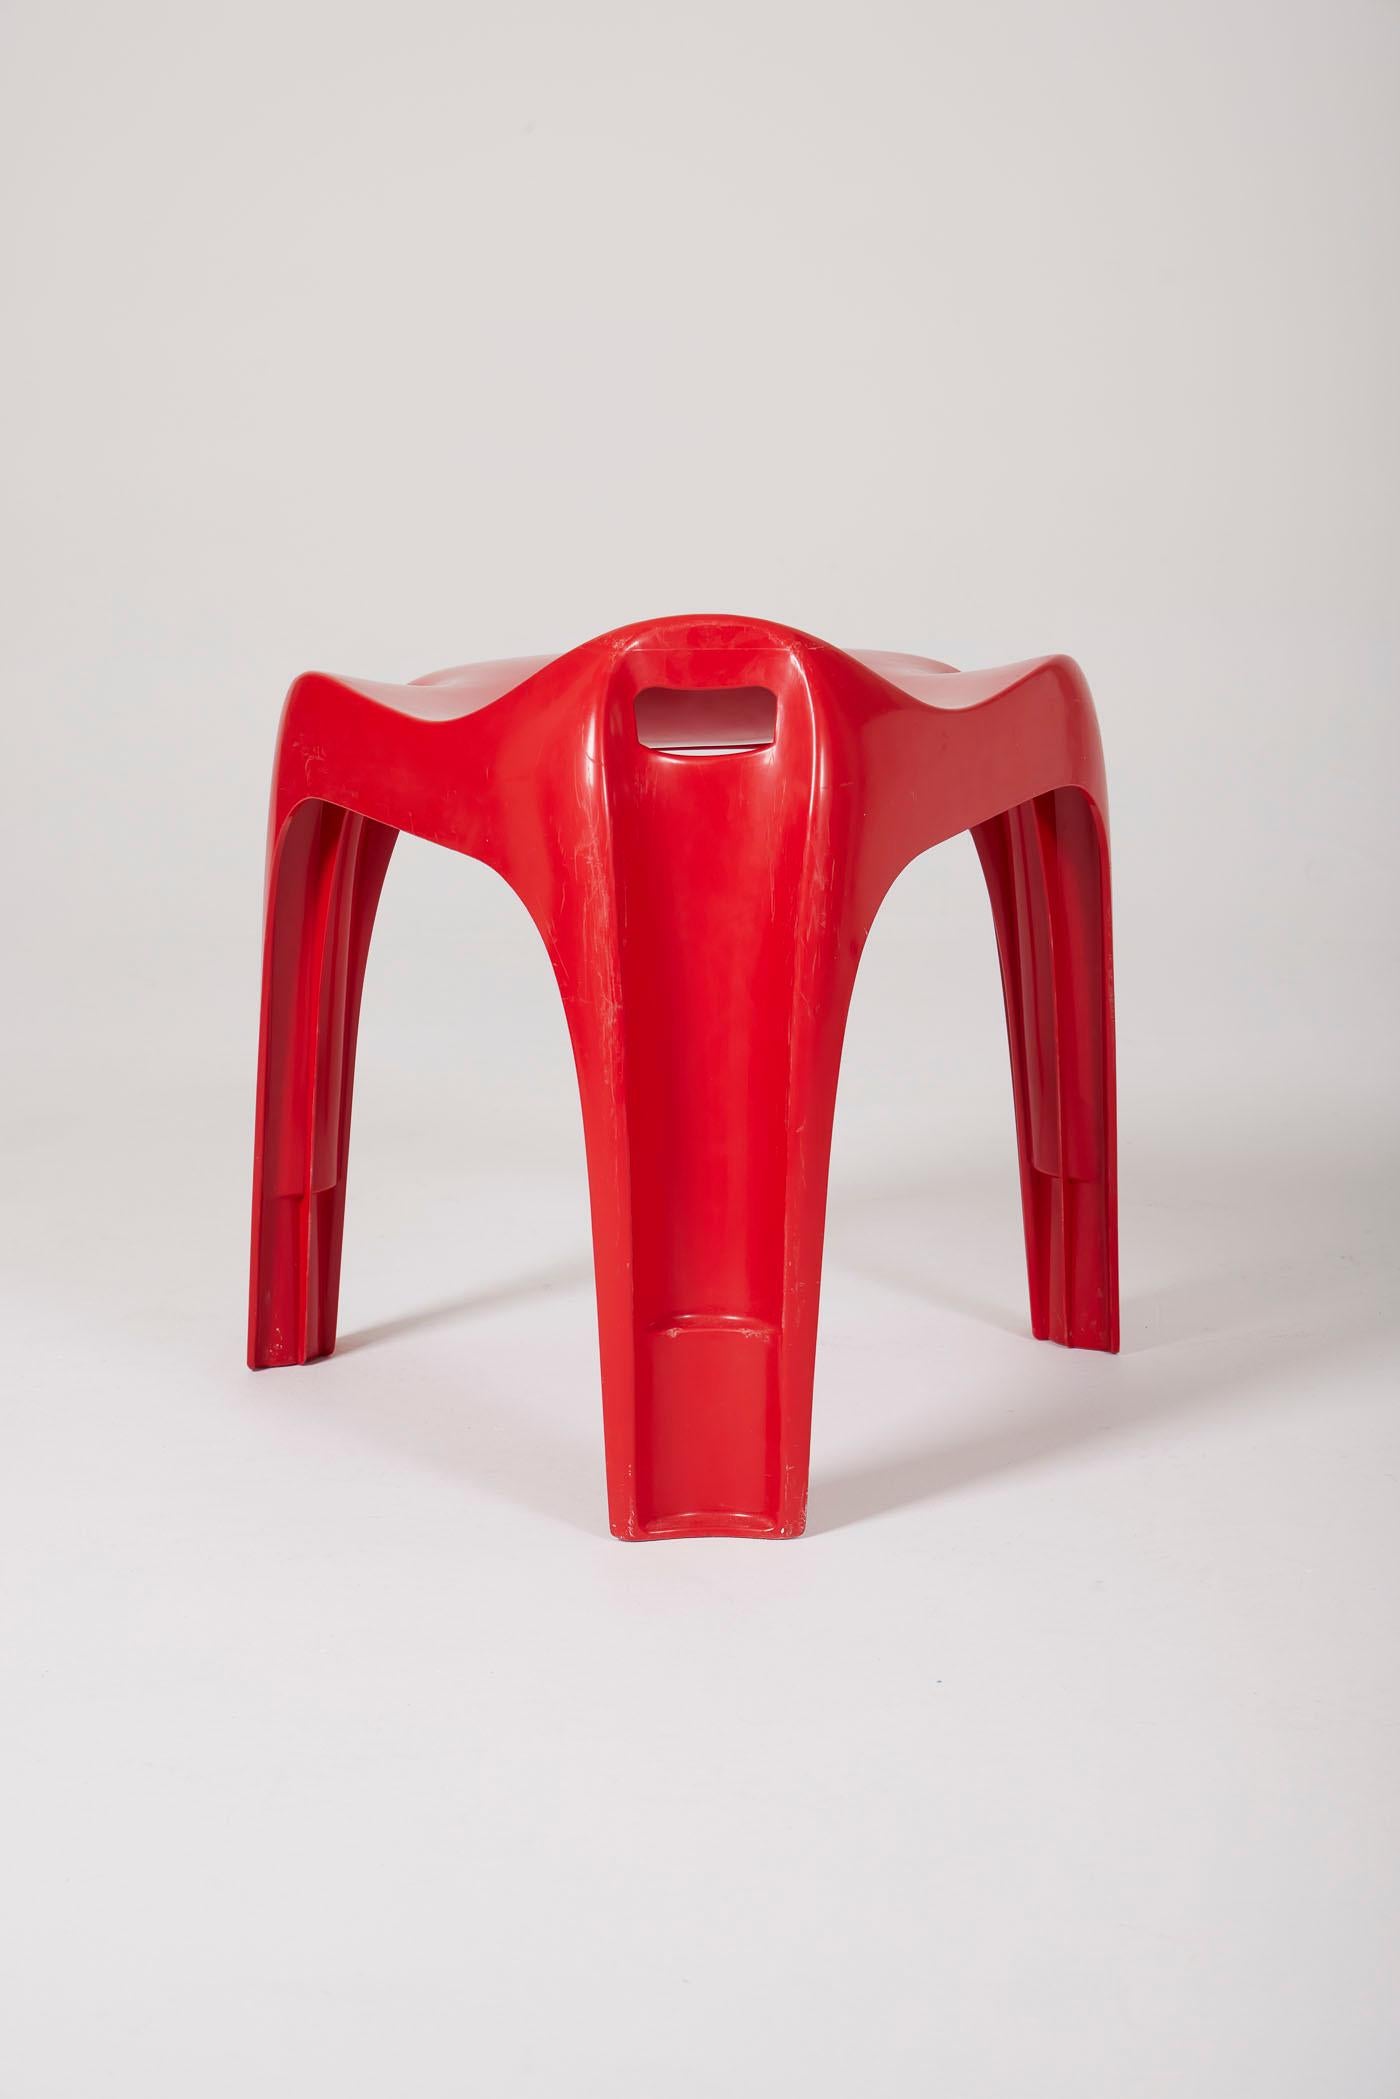 Alexander Begge stool In Good Condition For Sale In PARIS, FR